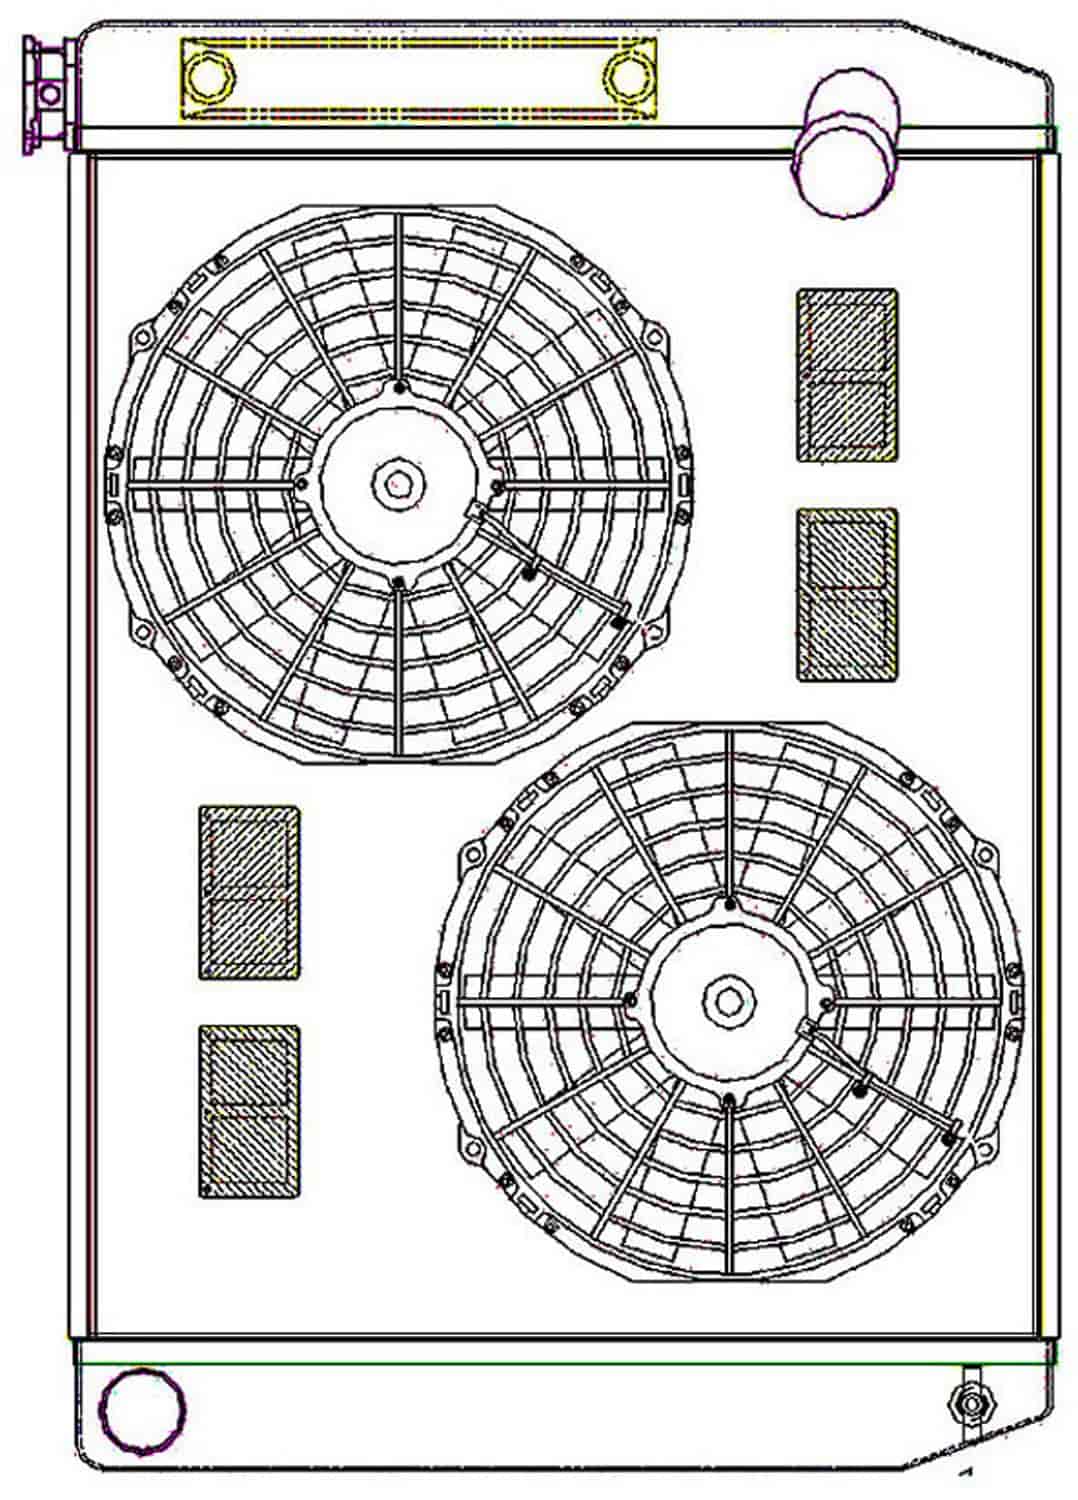 ClassicCool ComboUnit Universal Fit Radiator and Fan Single Pass Crossflow Design 27.50" x 19" with 16AN Inlet/Outlet